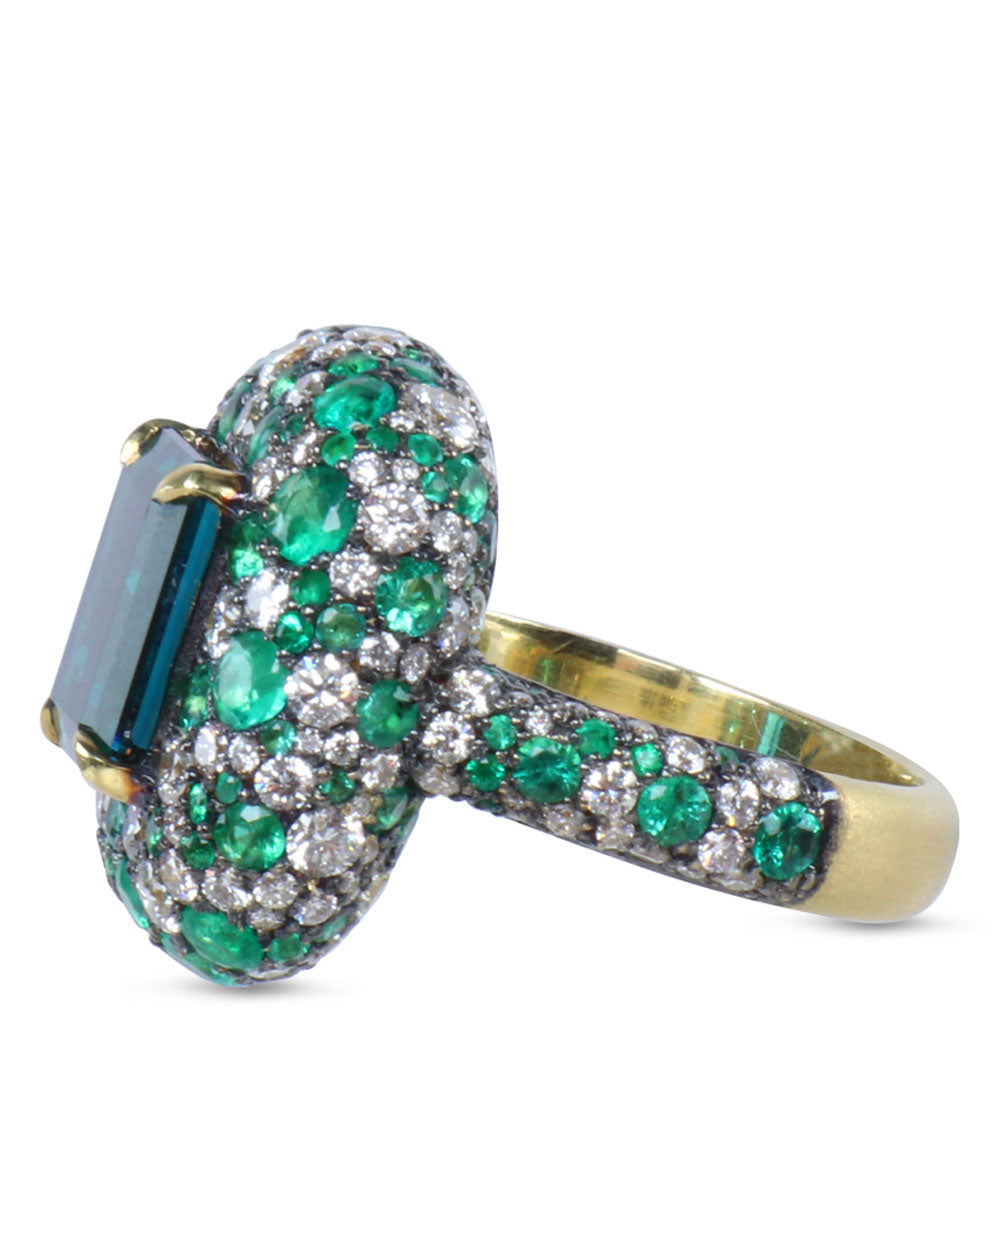 Indicolite Tourmaline and Emerald Cocktail Ring